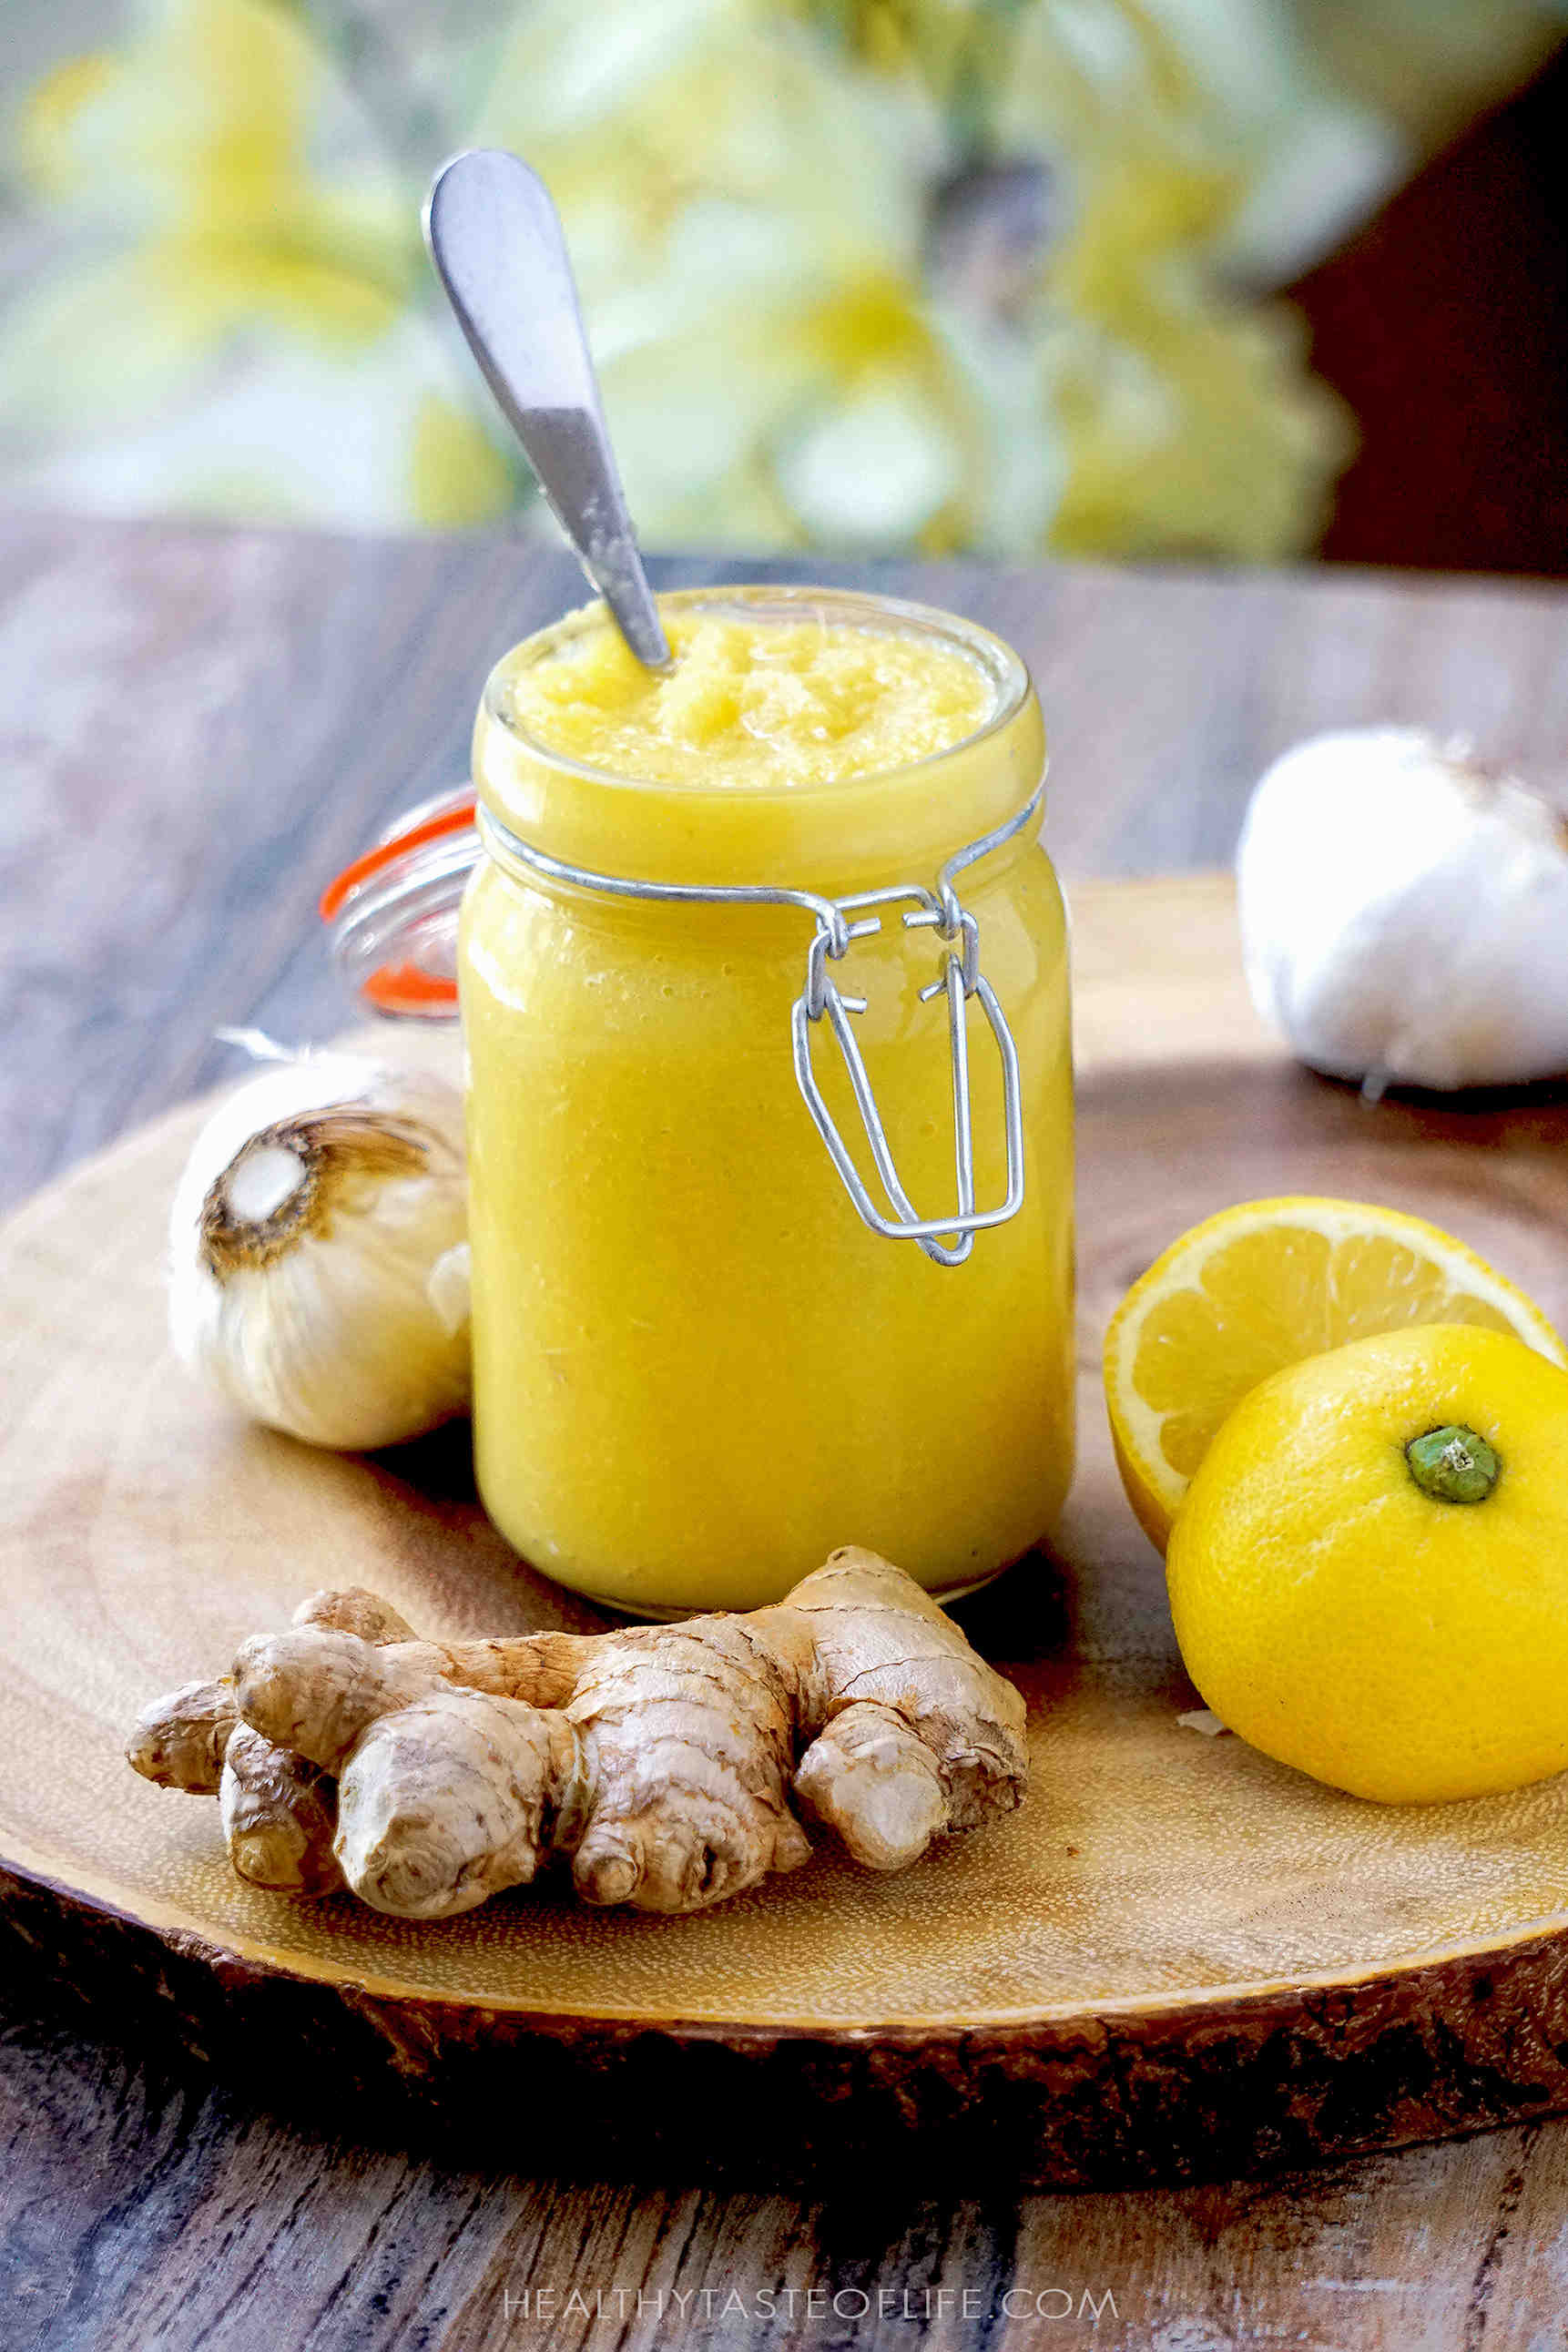 Immunity boosting recipe with lemon ginger garlic and honey mixture, a natural homemade immune booster tonic for cold and flu season.